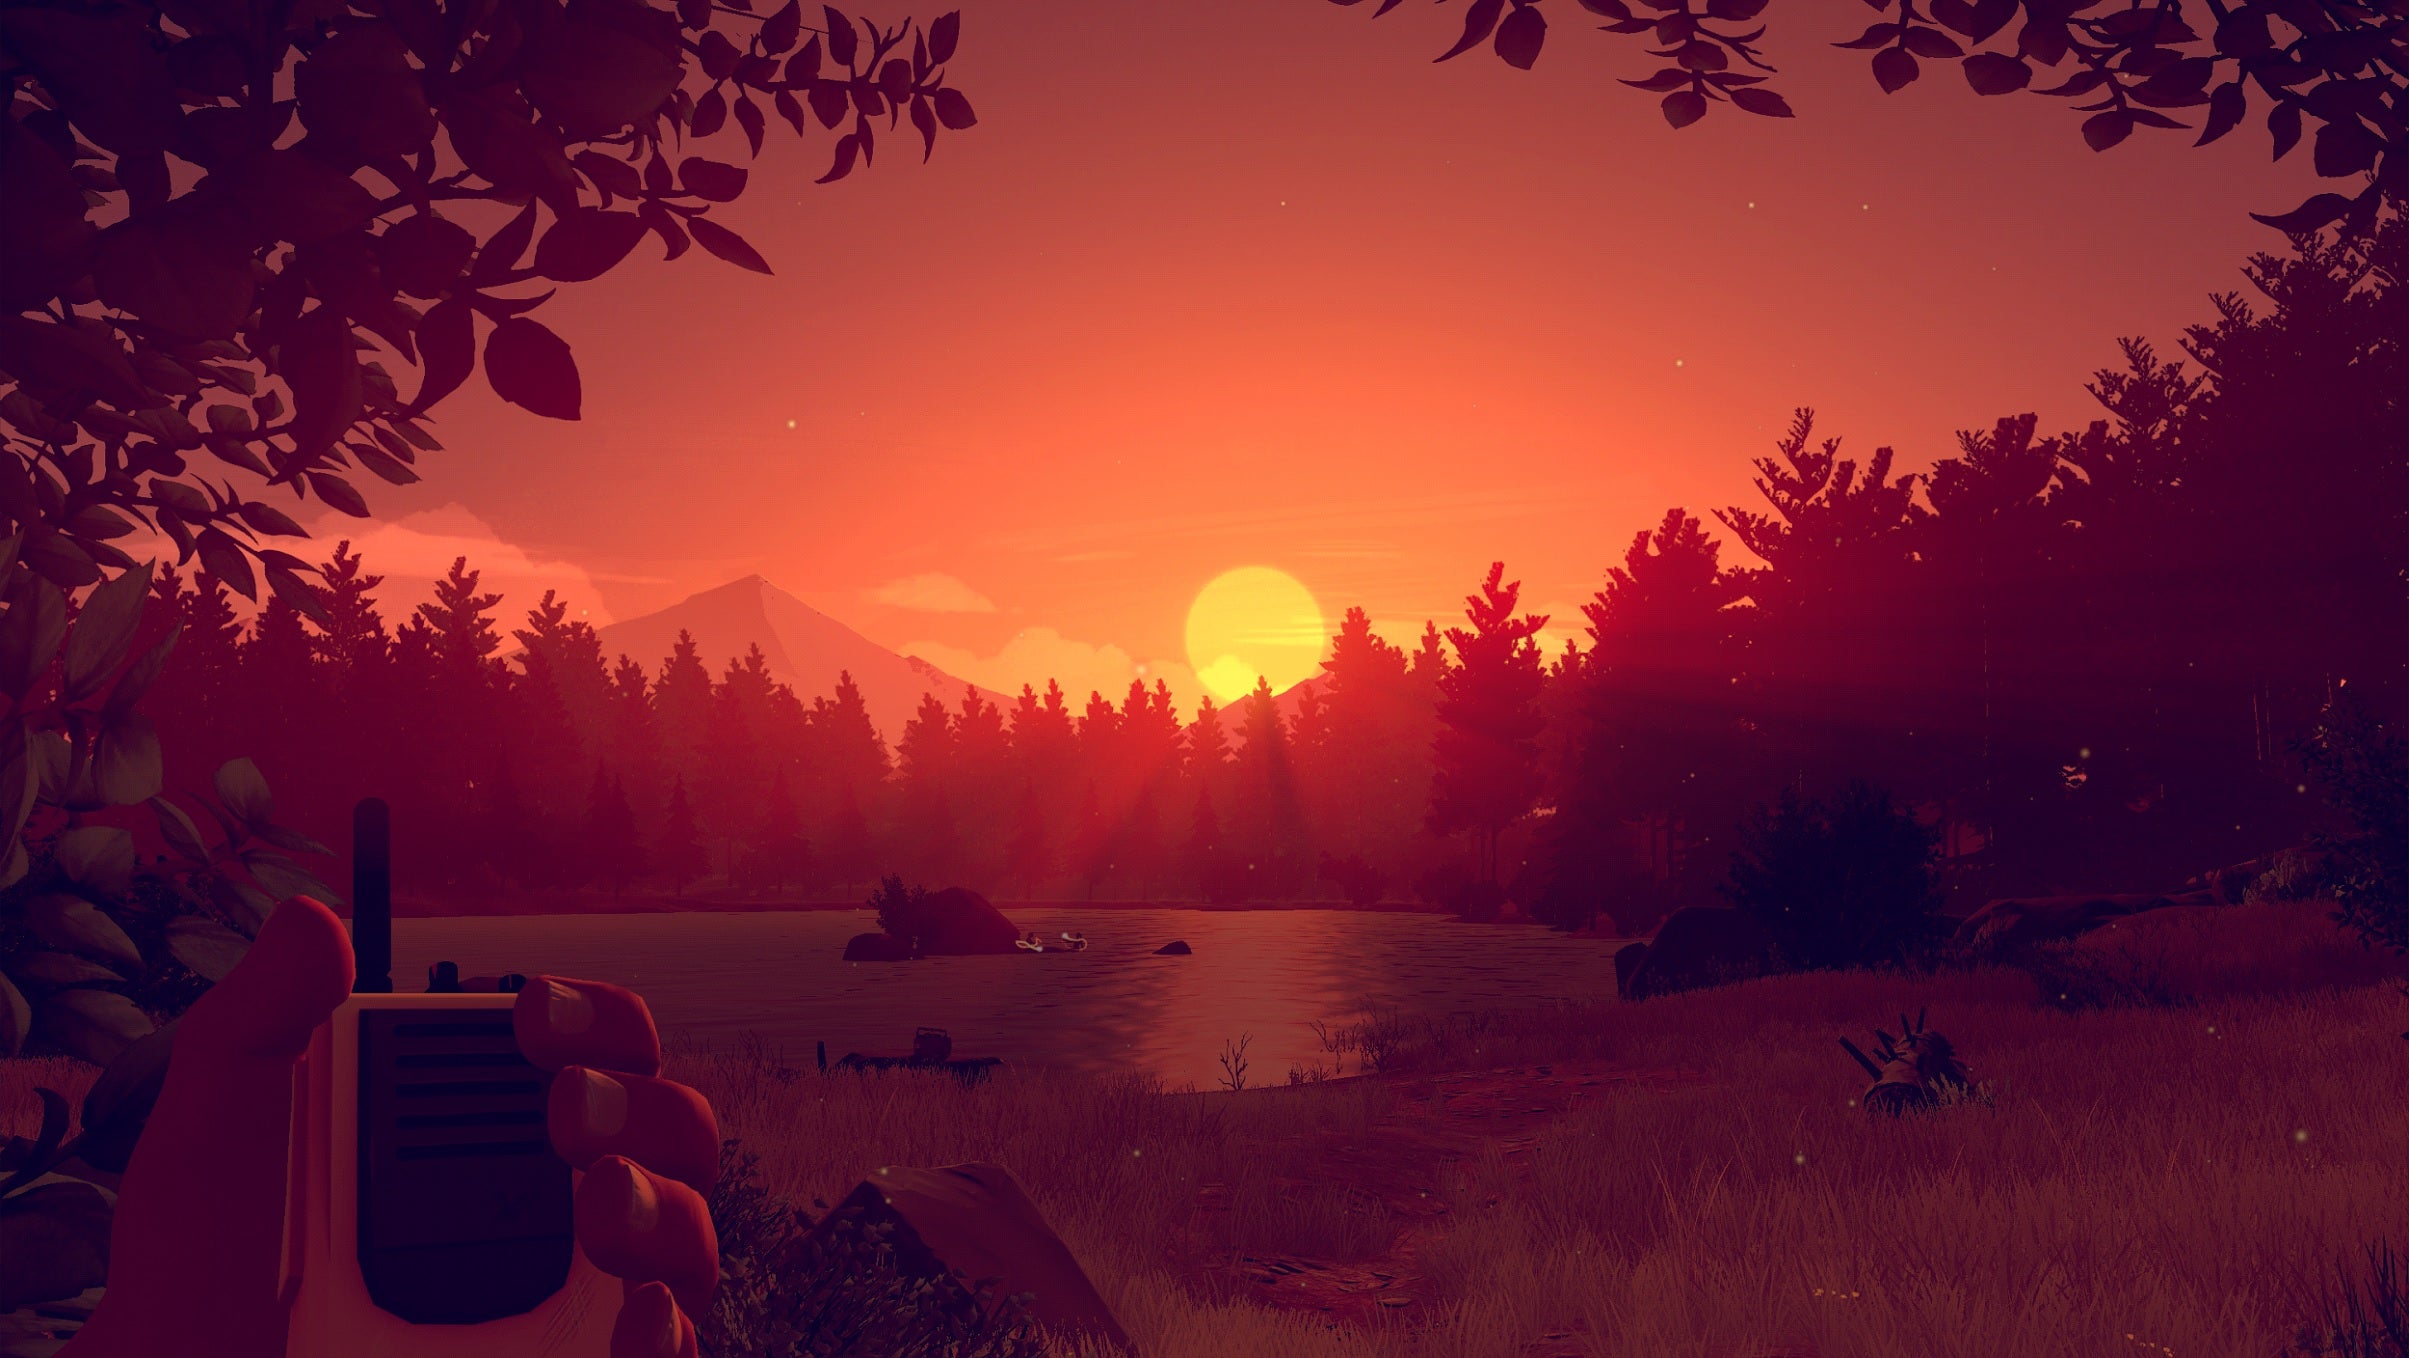 Image for Firewatch's walkie-talkie friendship is what made it stand out